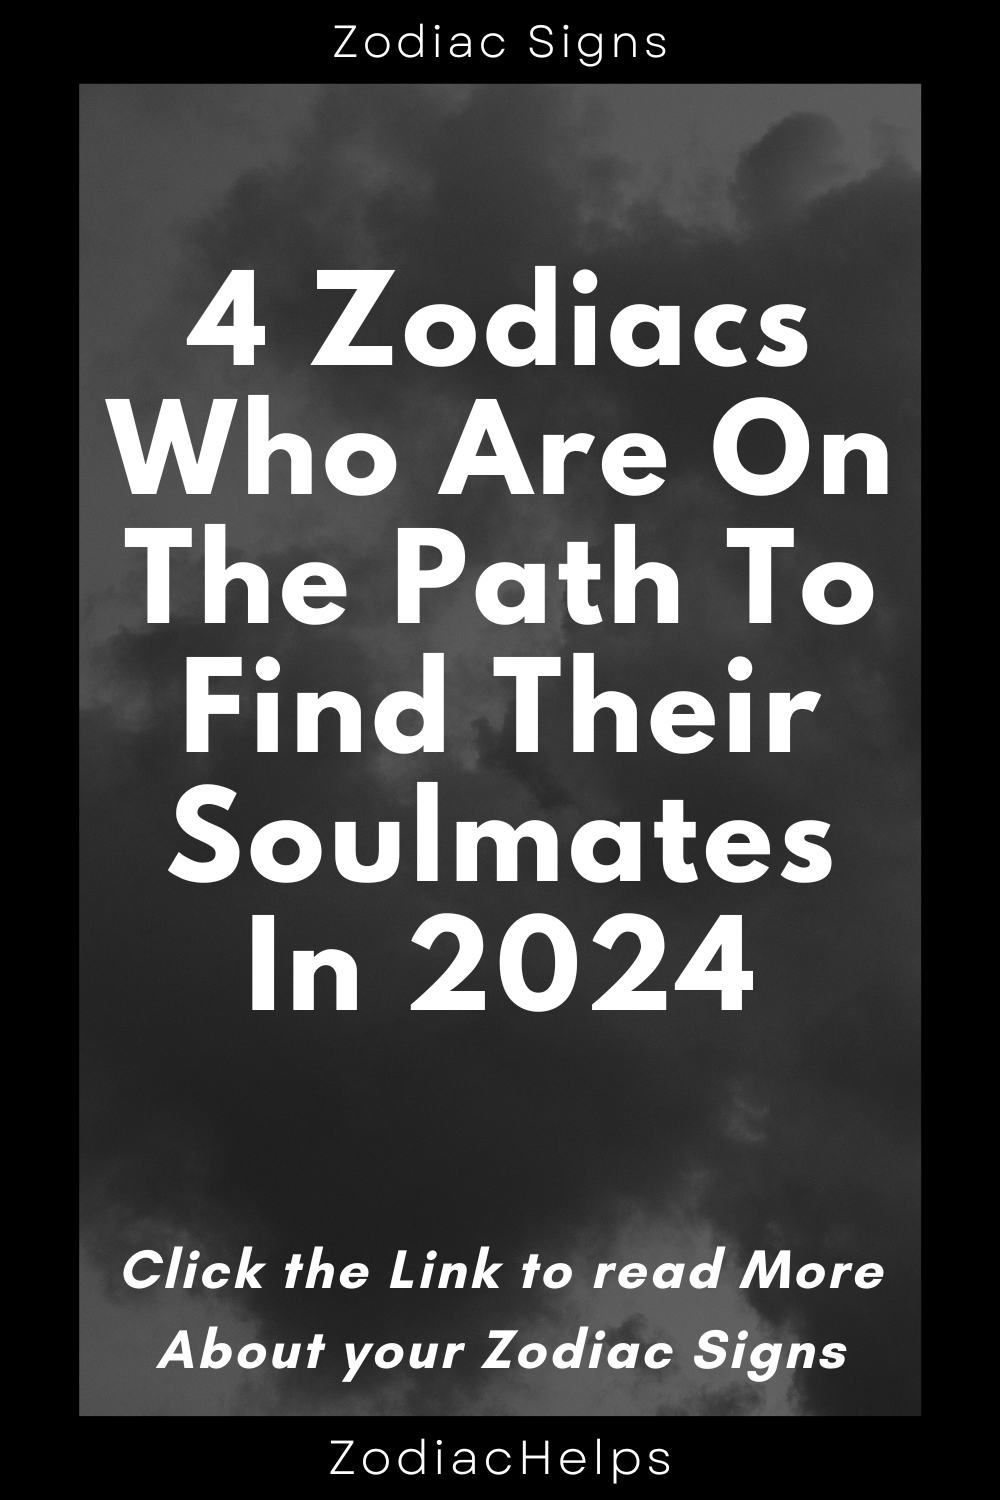 4 Zodiacs Who Are On The Path To Find Their Soulmates In 2024